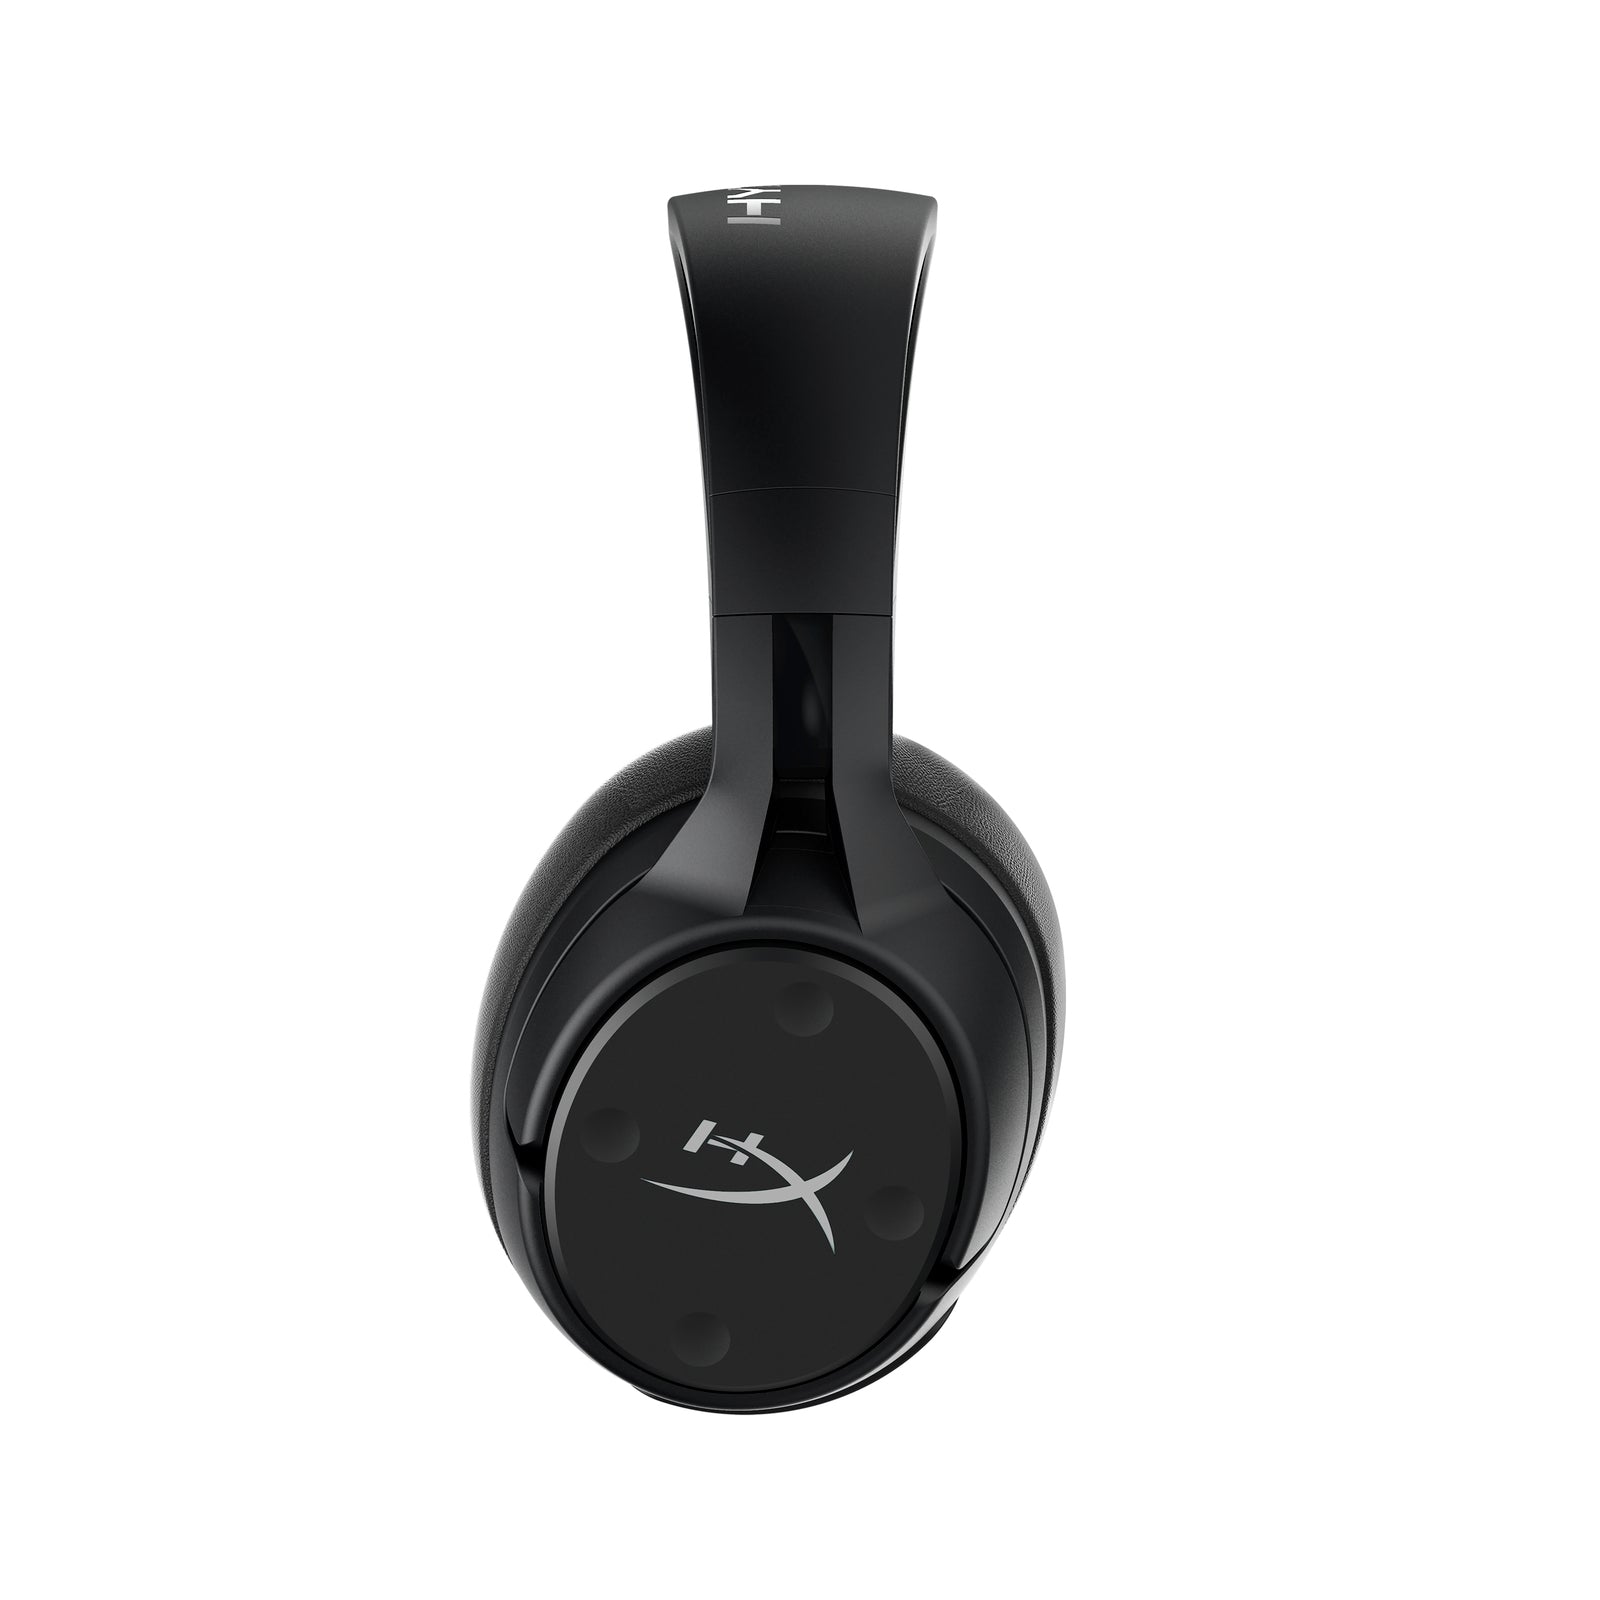 Cloud Flight S – Wireless USB Headset for PC and PS4 | HyperX 